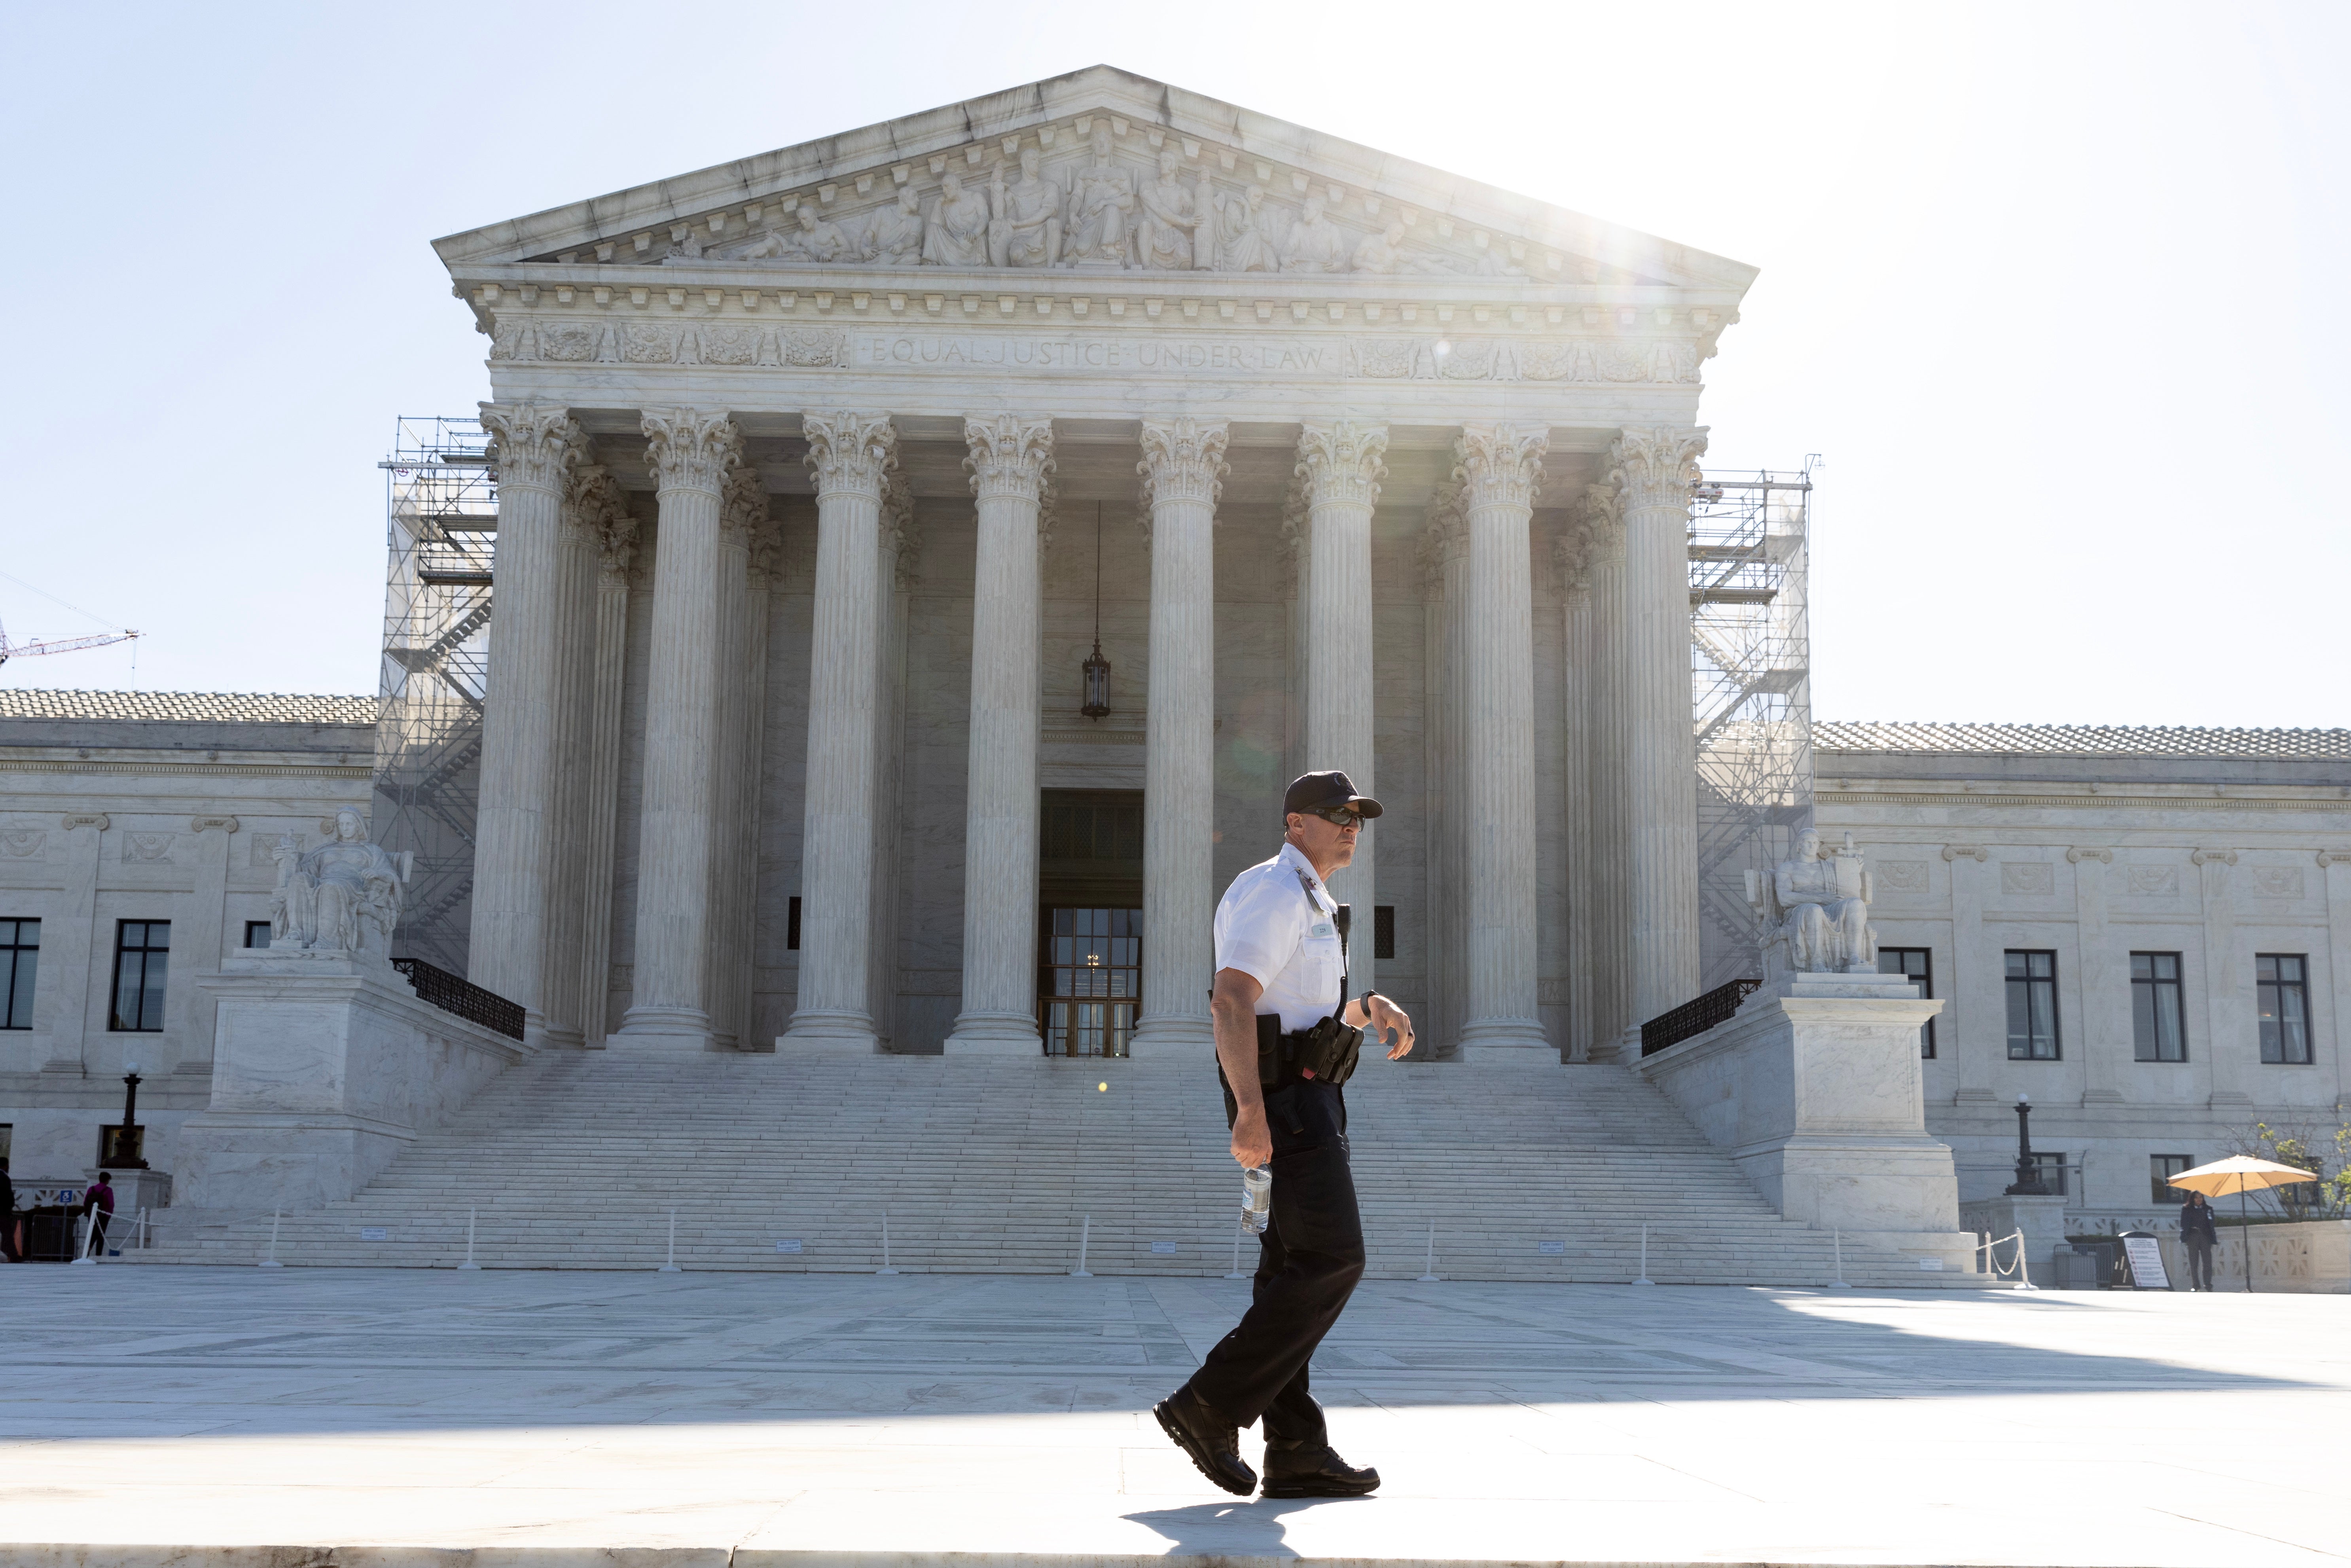 Justices at the Supreme Court have delivered Trump a key victory by delaying the growing pile of criminal and civil threats against him in courtrooms across the country